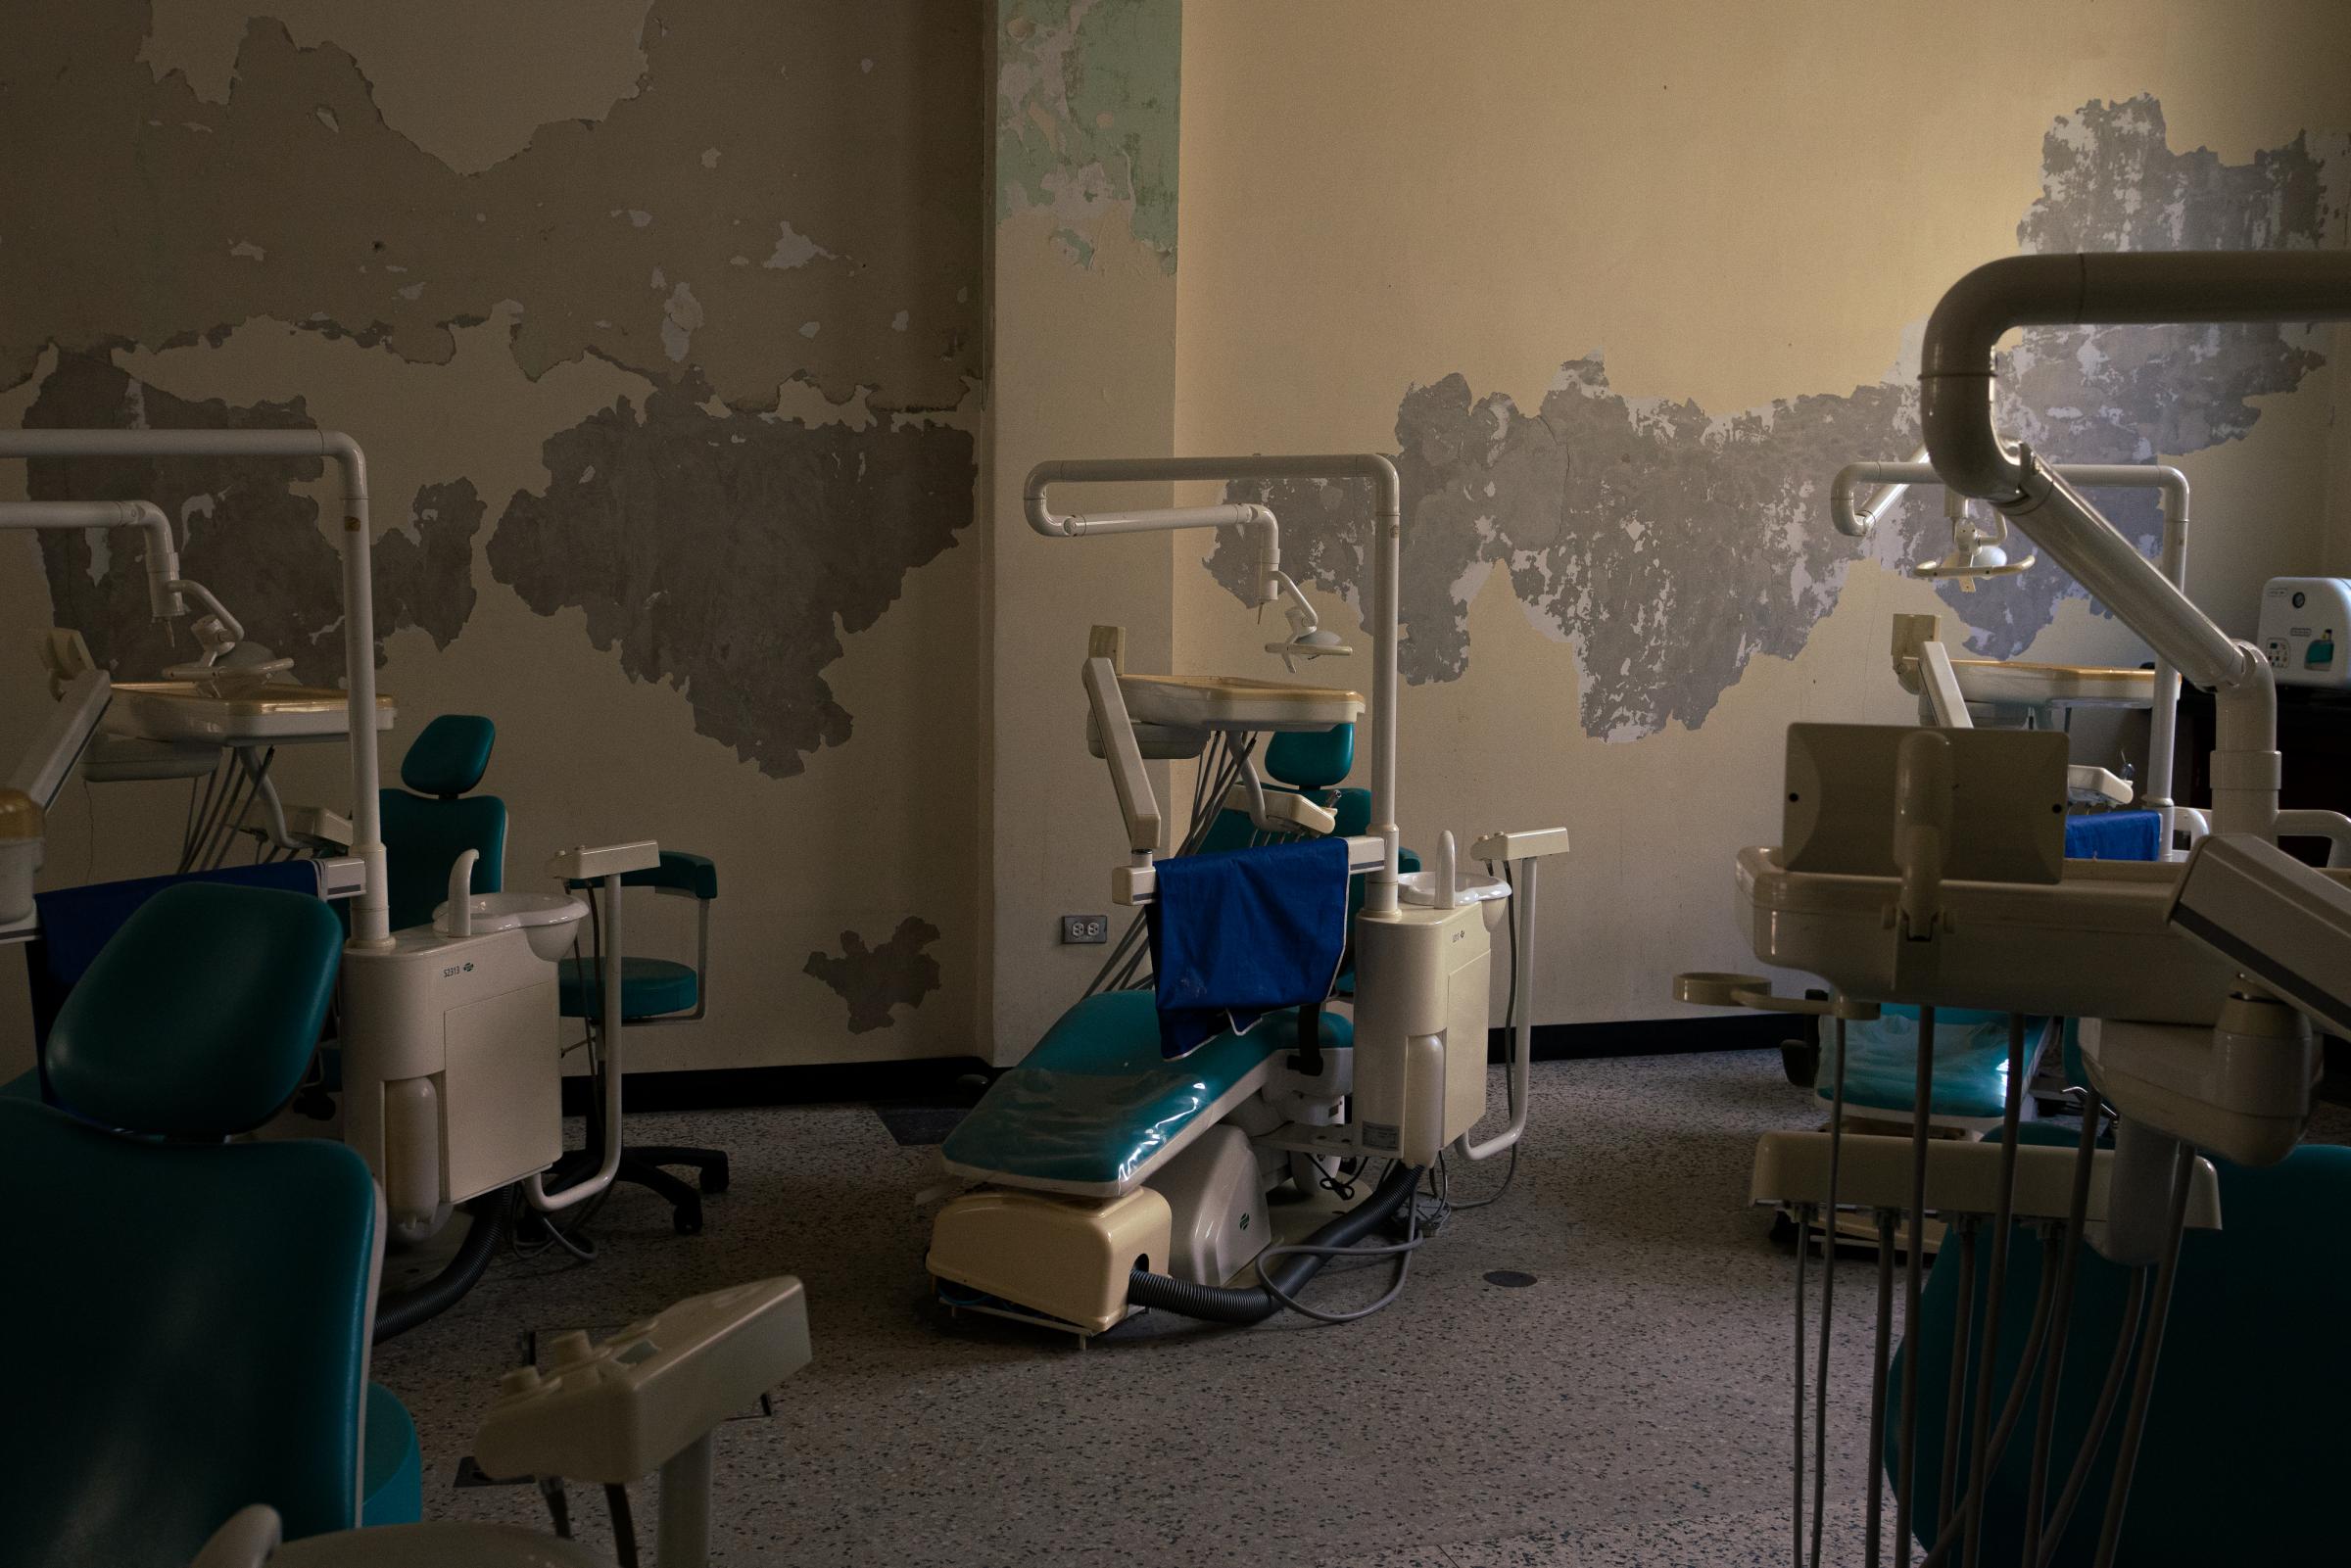 Aging and Abandoned in Venezuela's Failing State | The New Yorker - Walls peal in the dental school's classrooms at the...